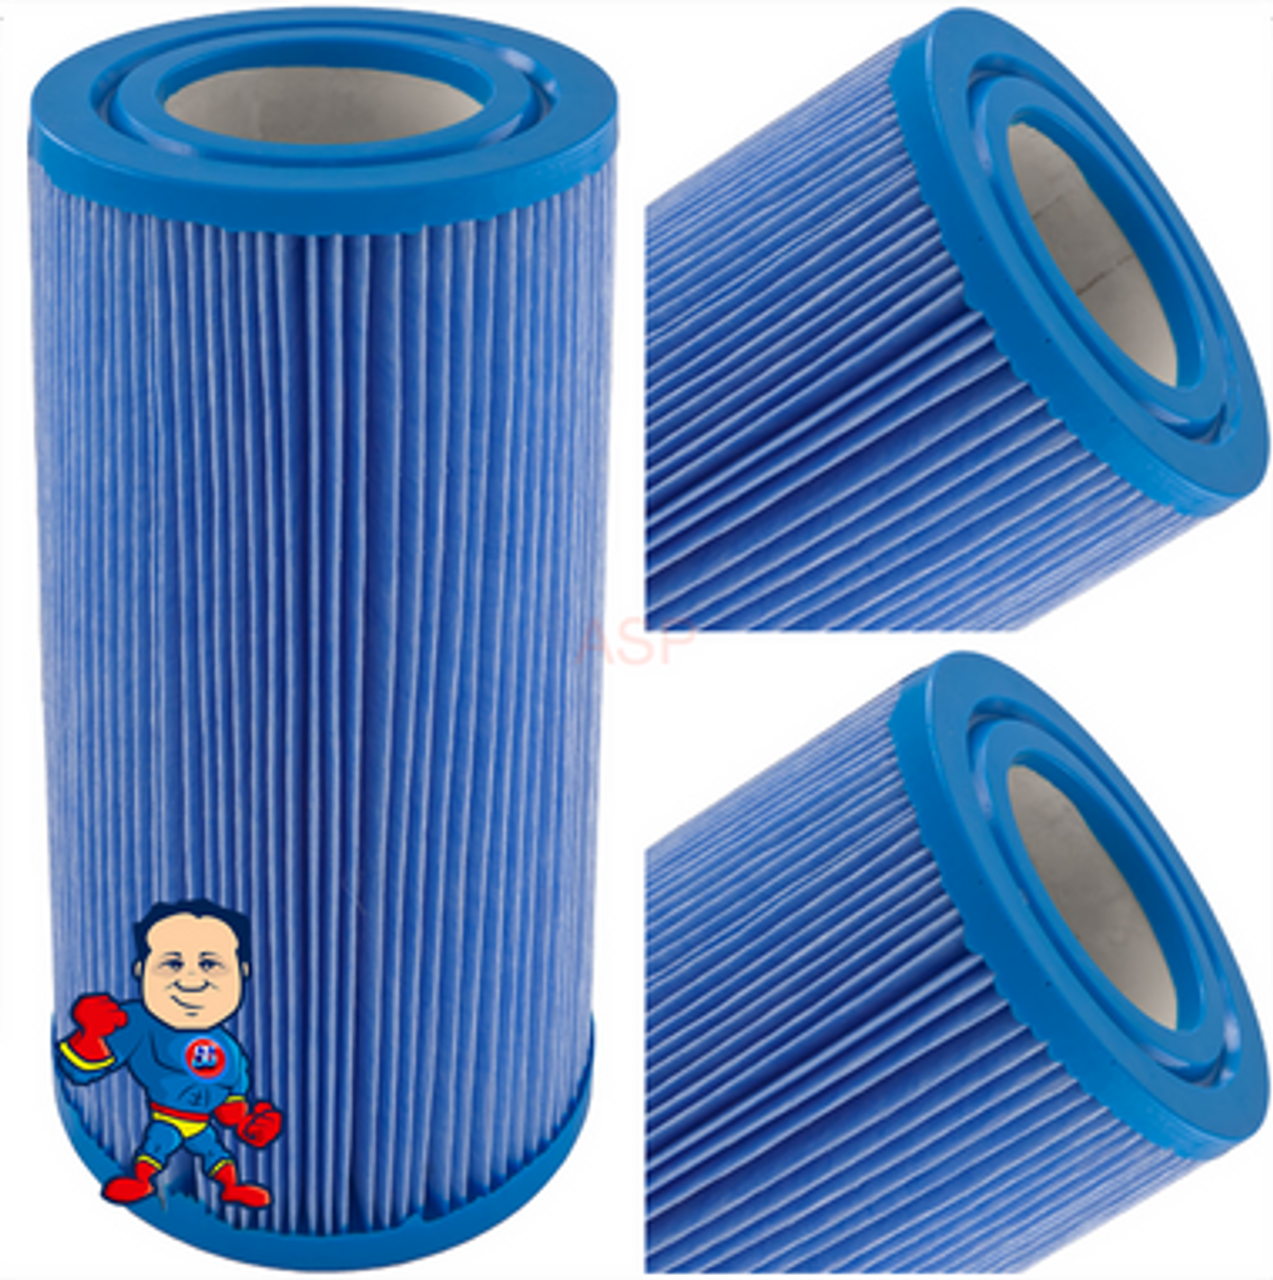 Filter, Cartridge, Eco-Pur, Style 10sqft, 7-1/8" Tall X 3 7/8"Wide  2-1/8"Hole Master Spa Down East